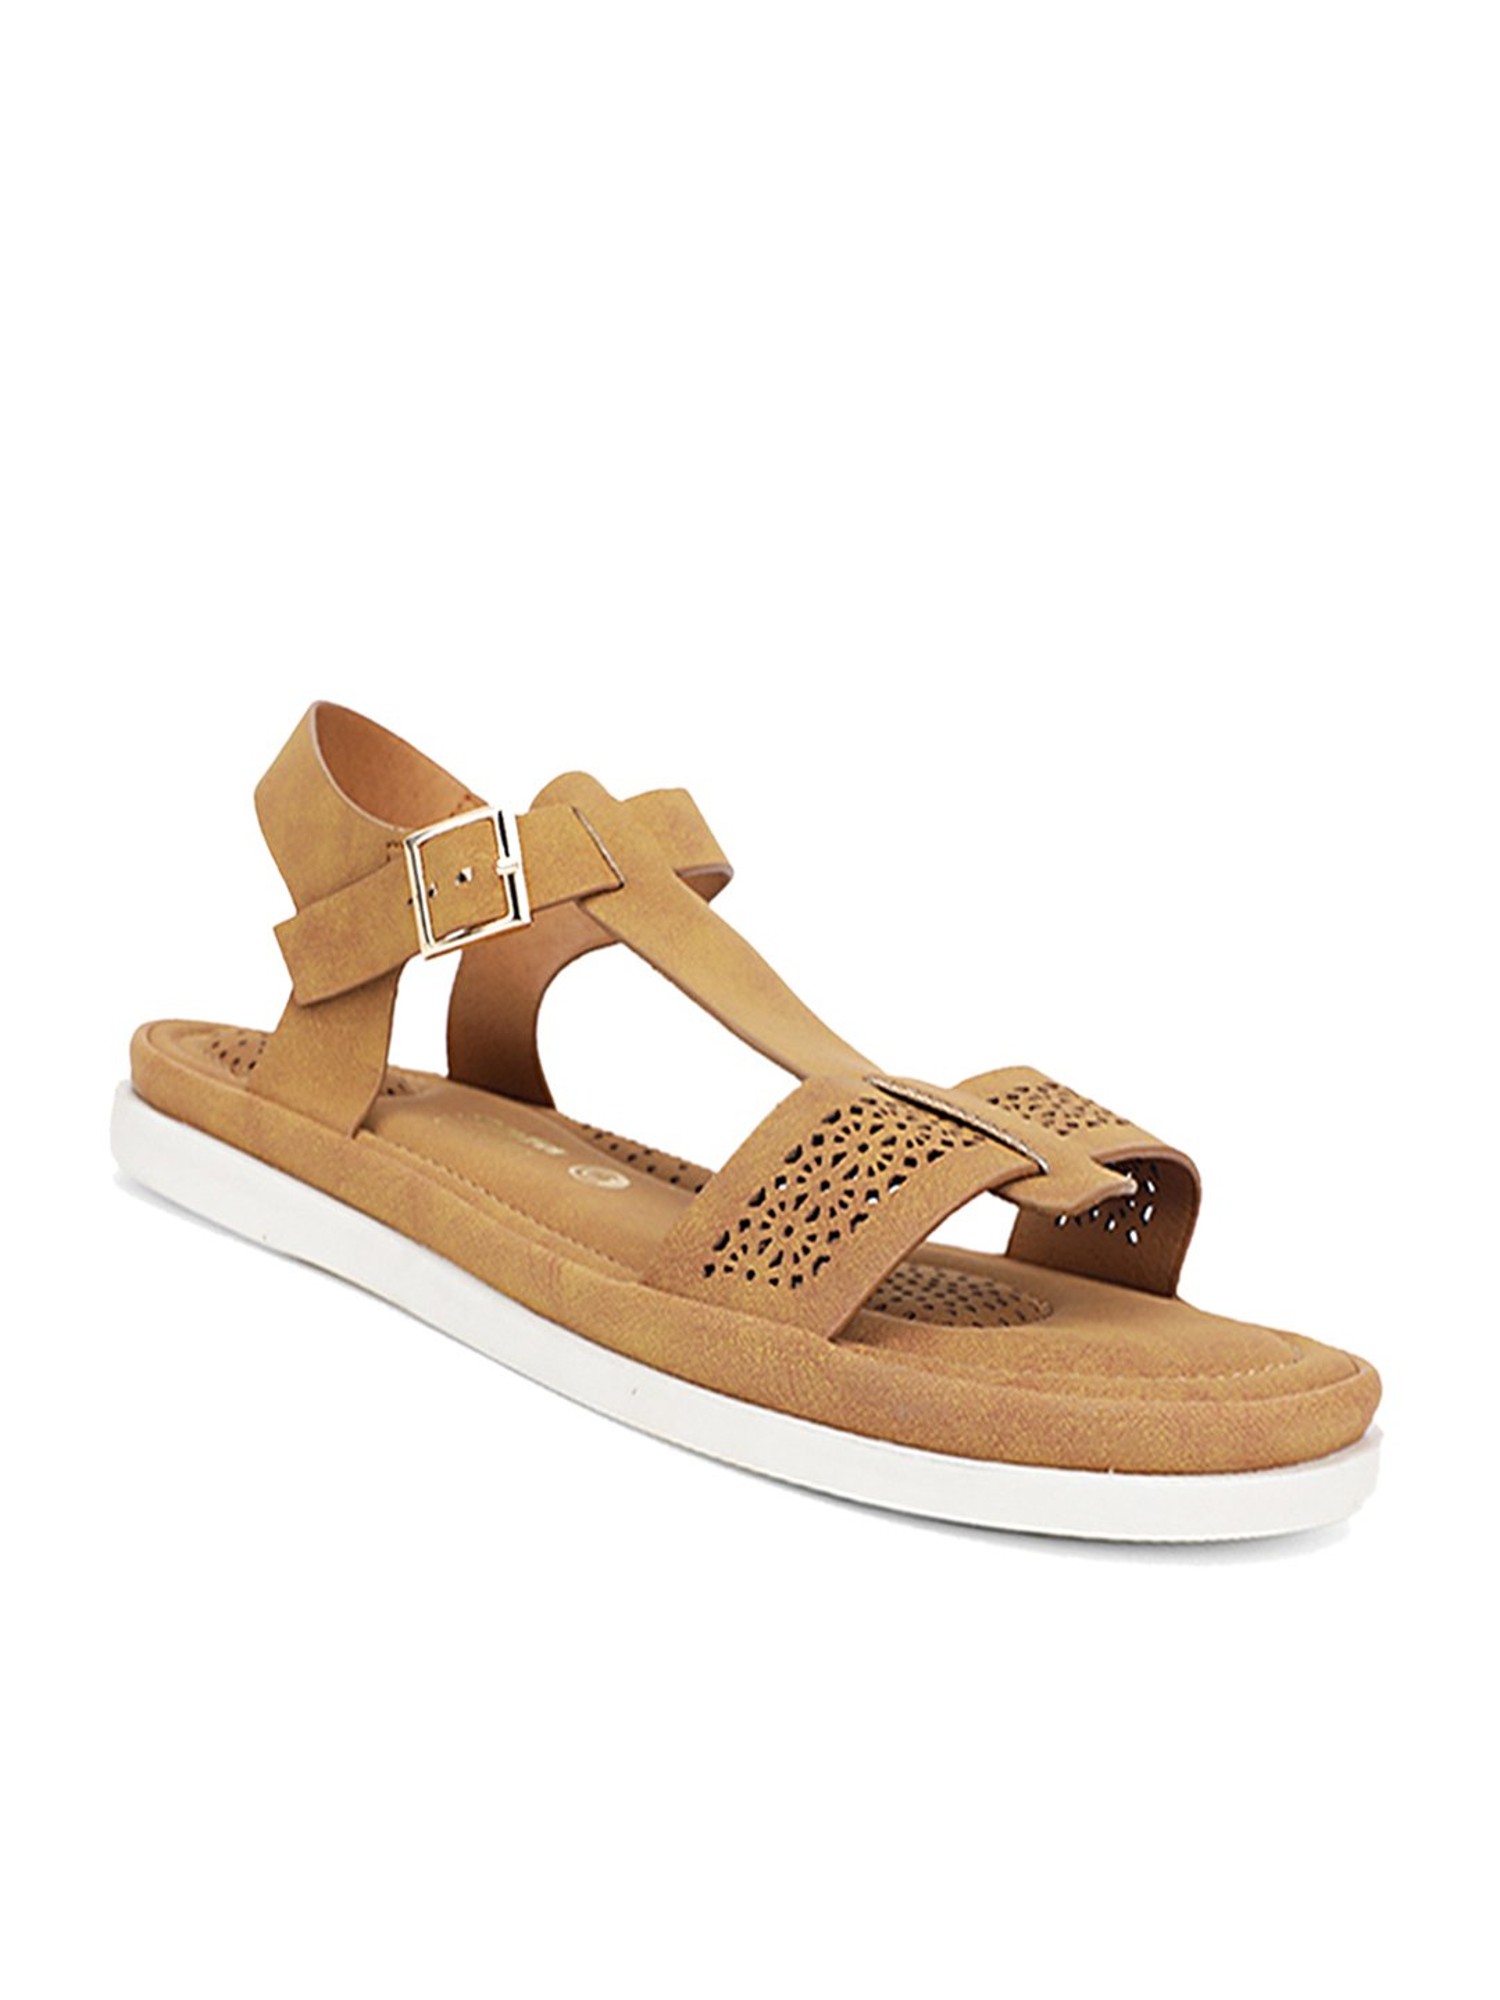 Bata Women Casual Embellished Flat Sandals- Gold: Buy Bata Women Casual  Embellished Flat Sandals- Gold Online at Best Price in India | Nykaa